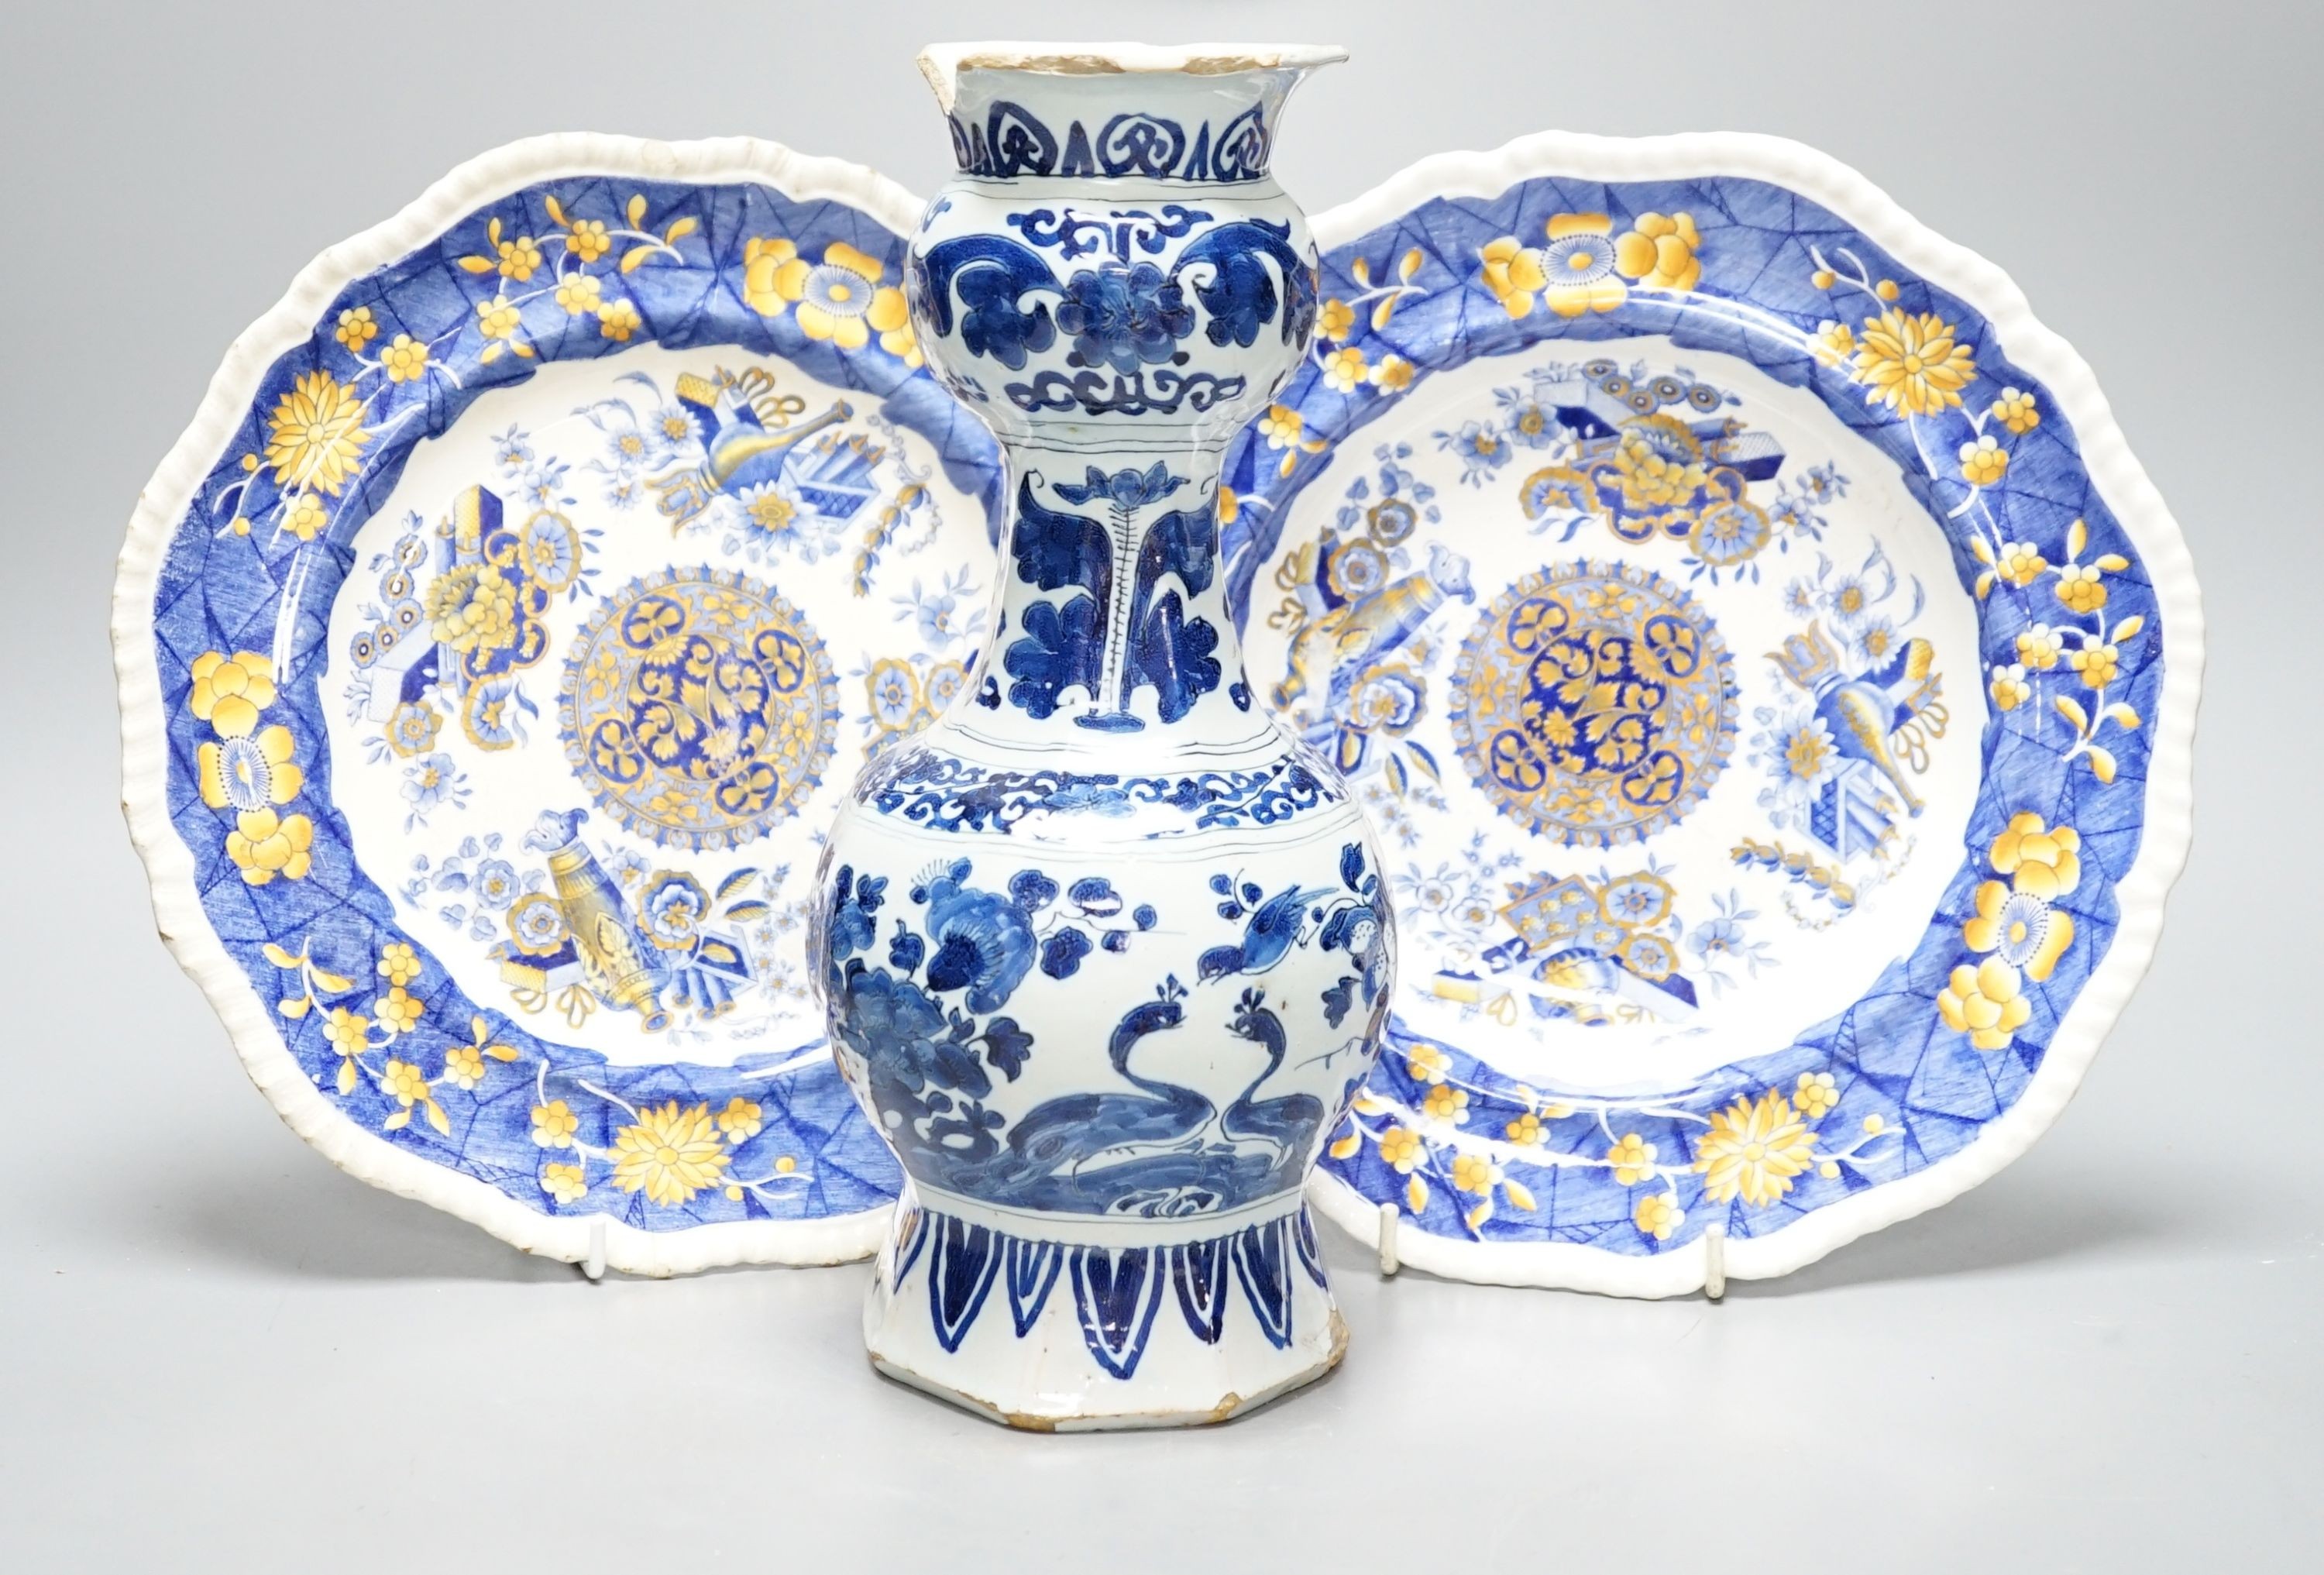 An 18th century Deflt vase and two early 19th century Spode pottery dishes, vase 24 cms high